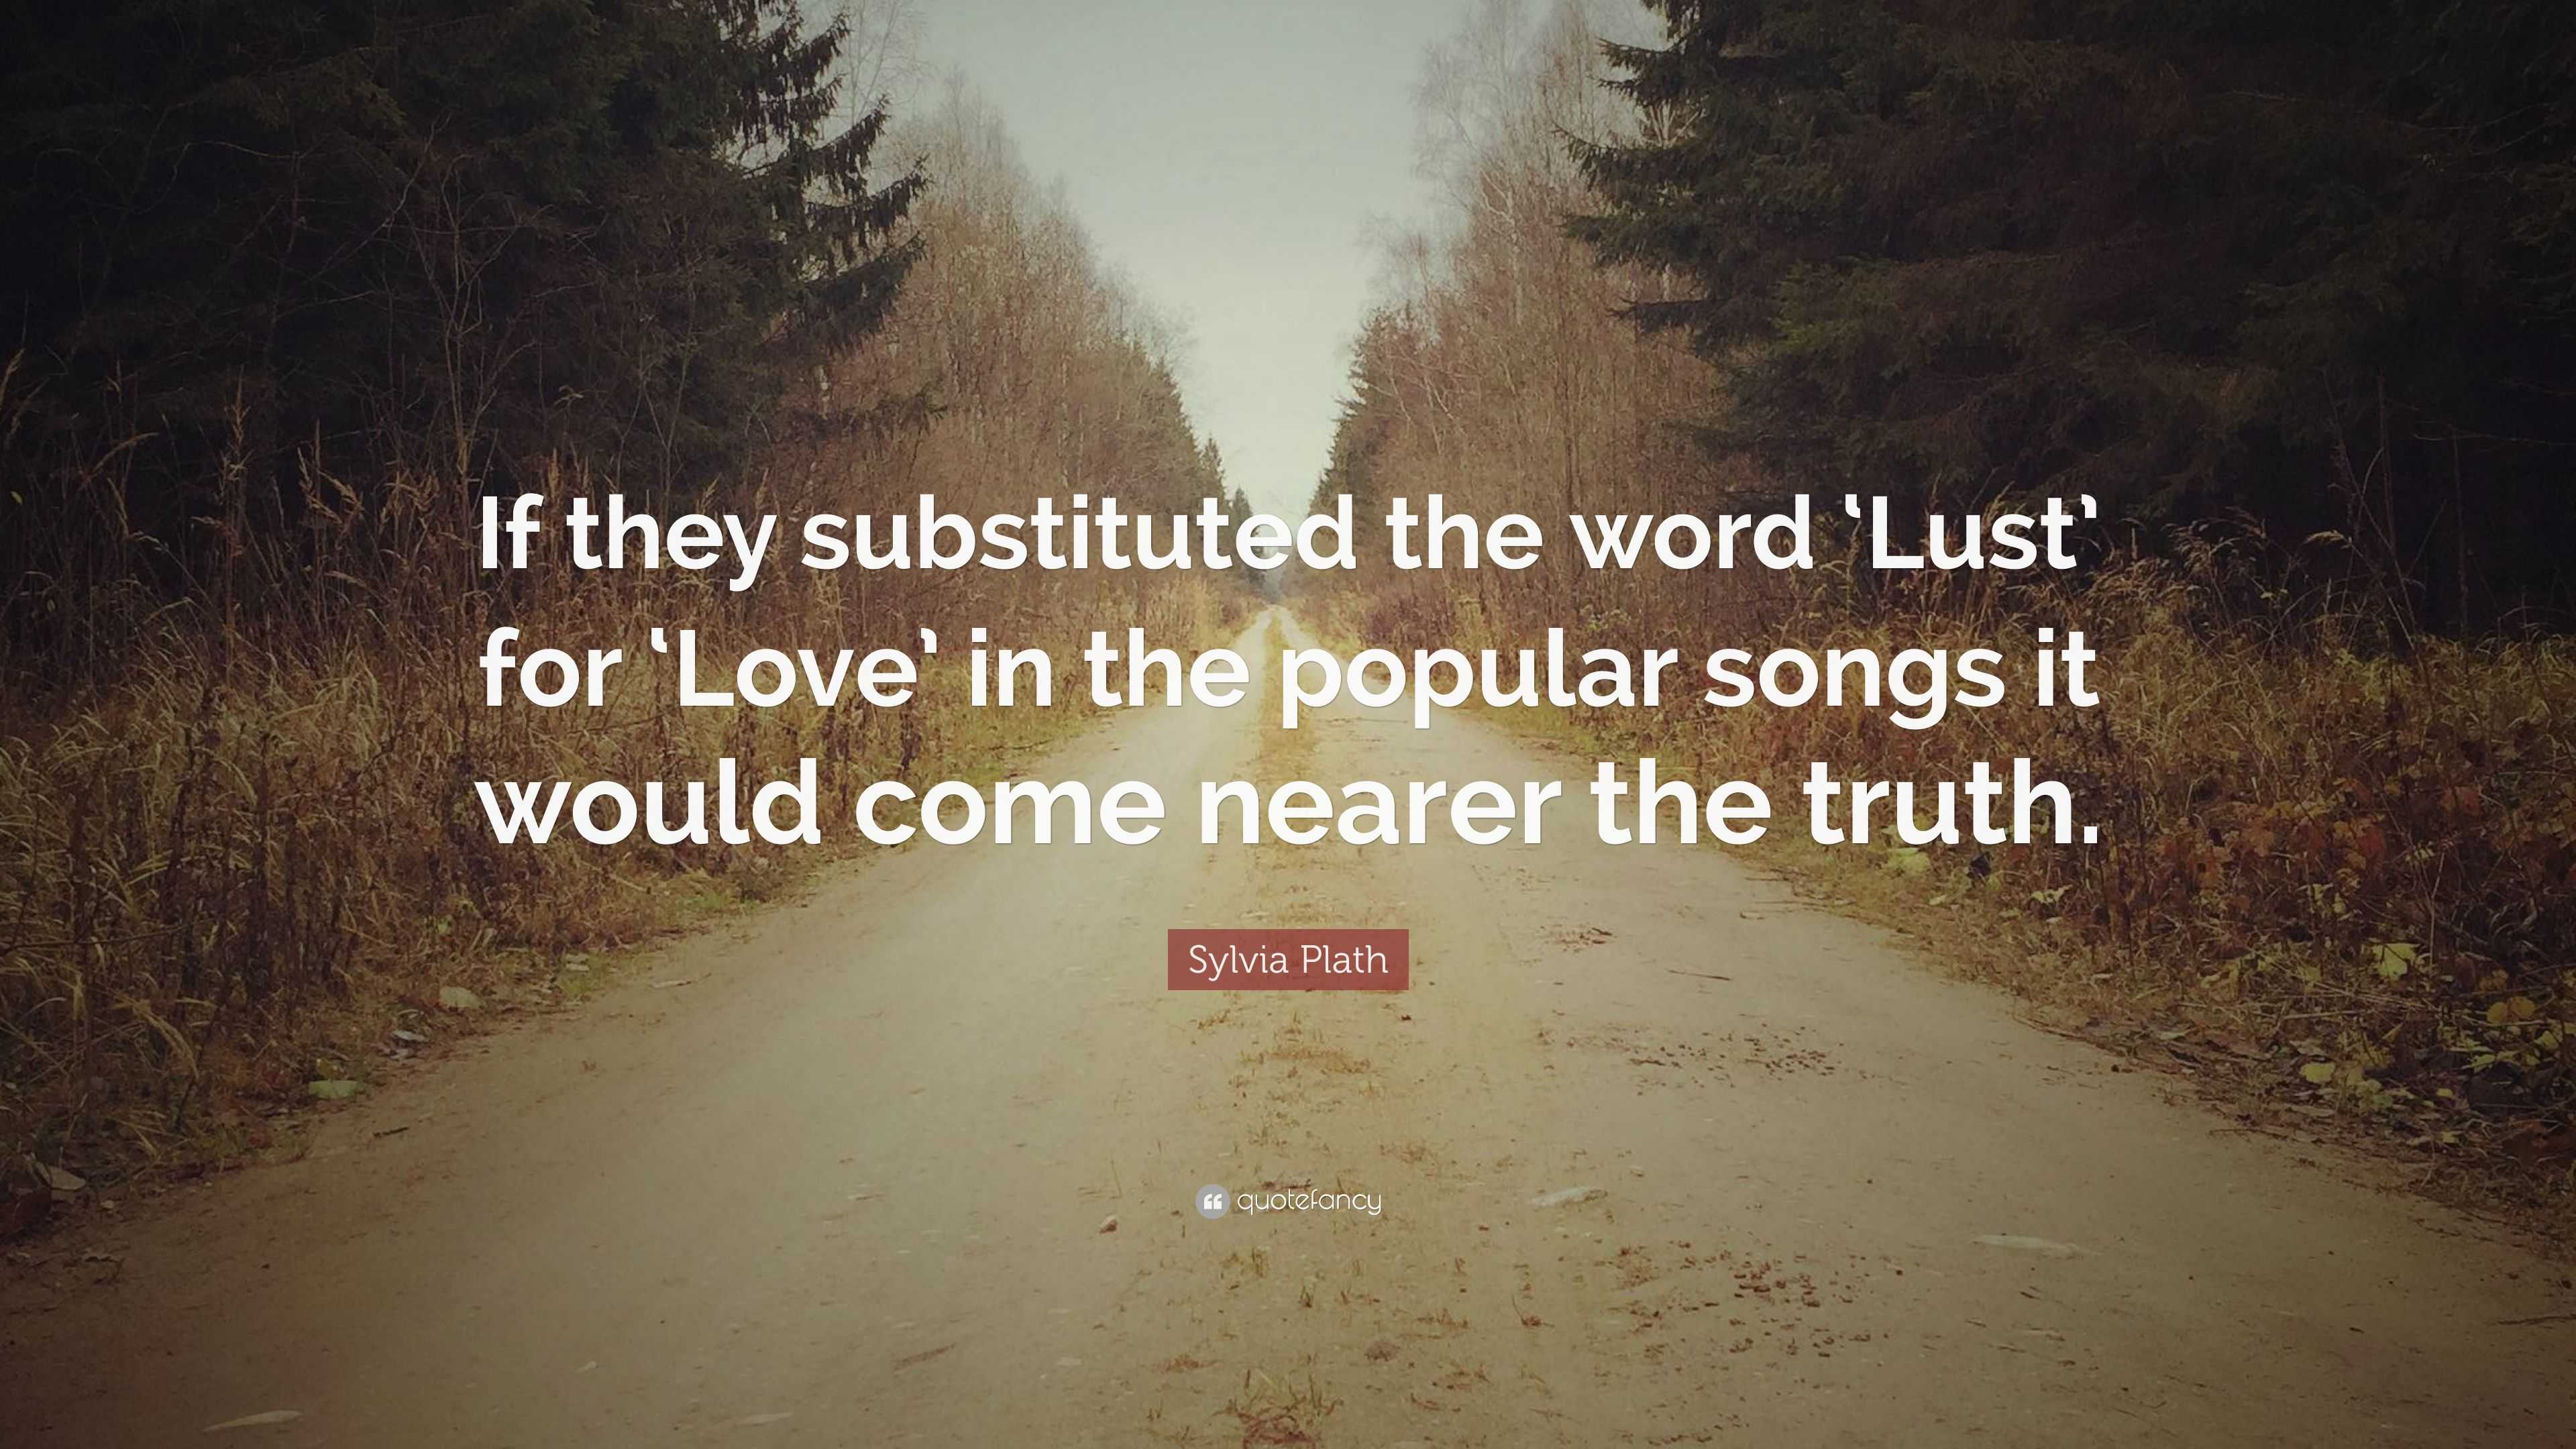 Sylvia Plath Quote: "If they substituted the word 'Lust' for 'Love' in the popular songs it ...